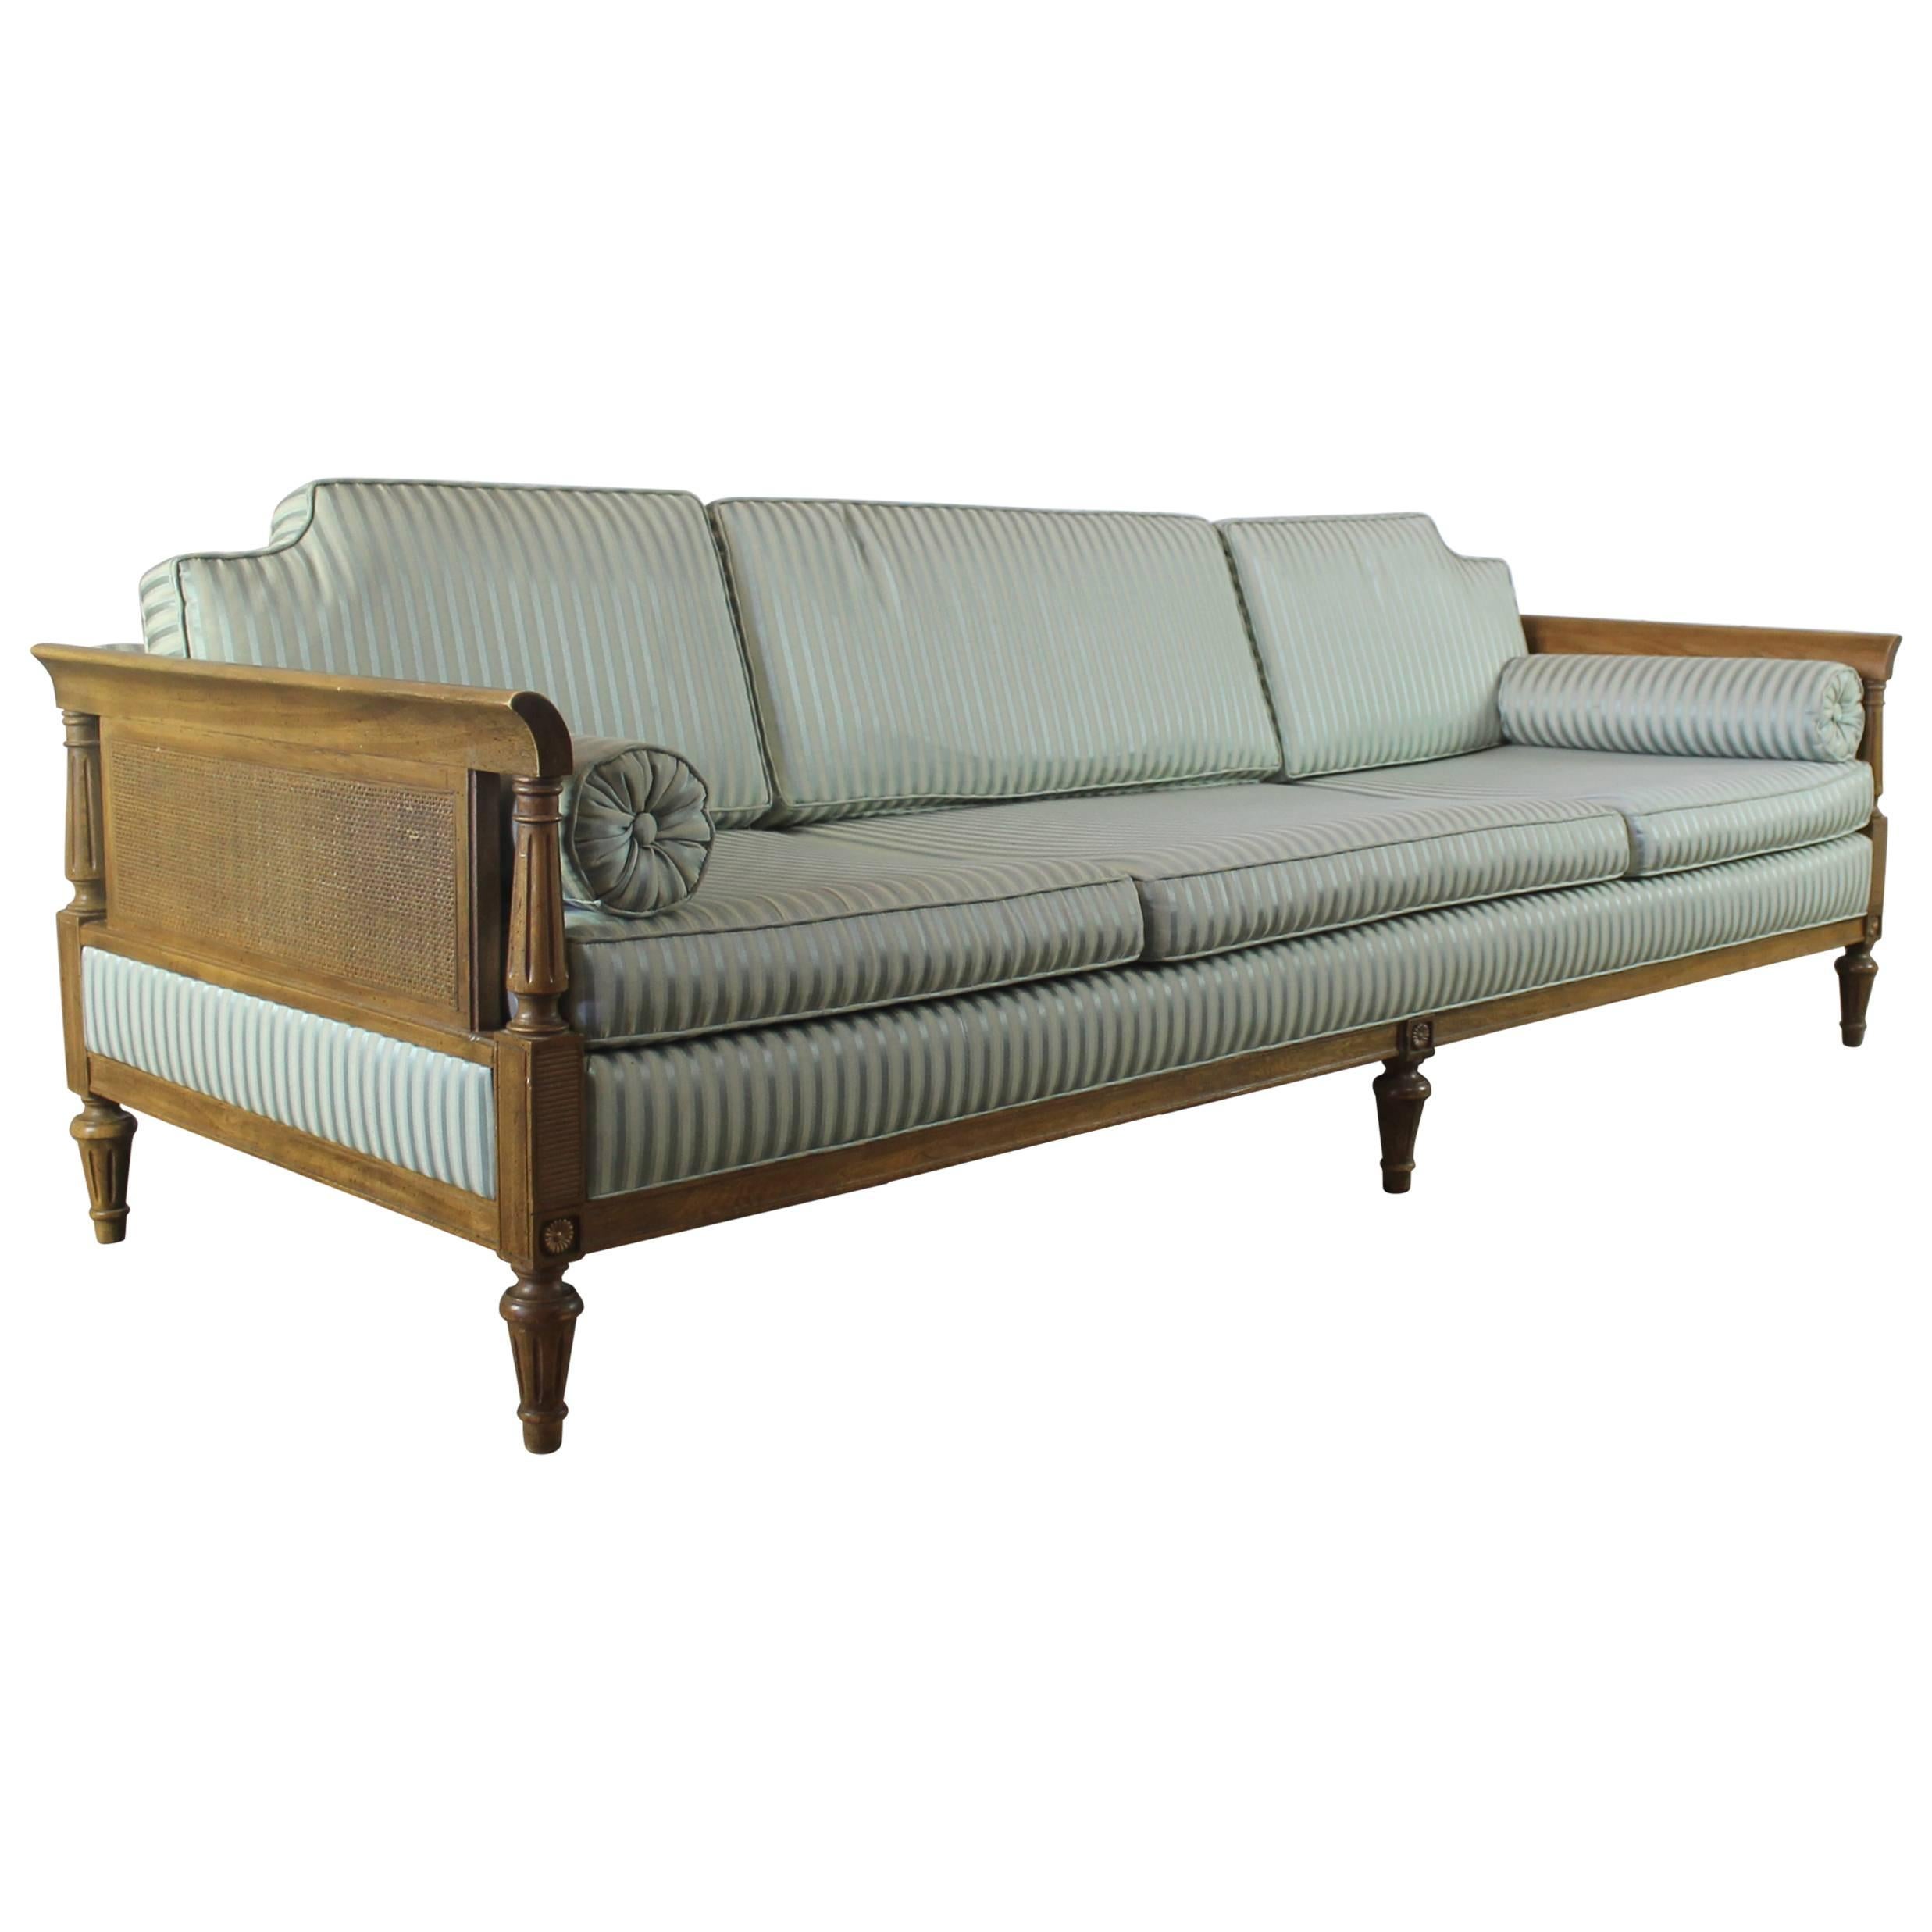 Vintage Hollywood Regency Neoclassic Sofa with Caned Sides